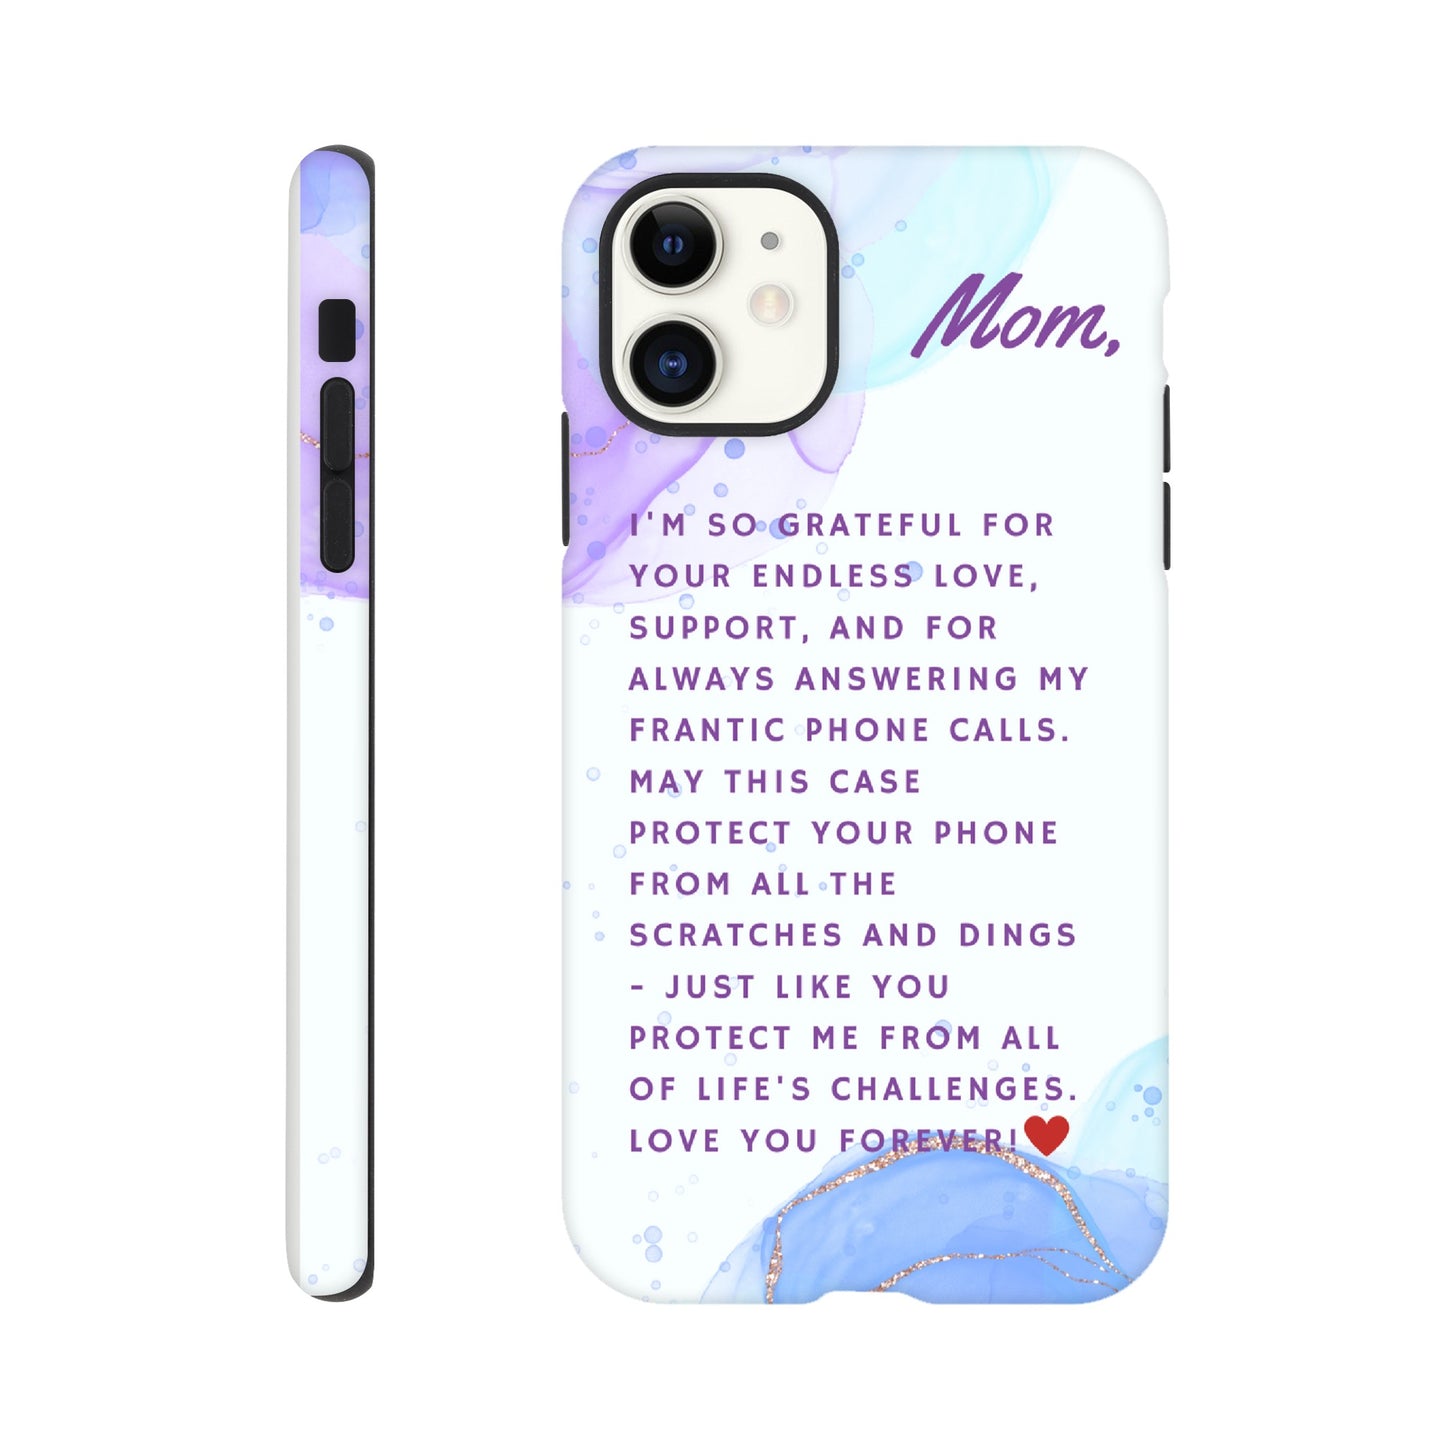 Endless Love and Protection Tough Case For Mom (For iPhone)